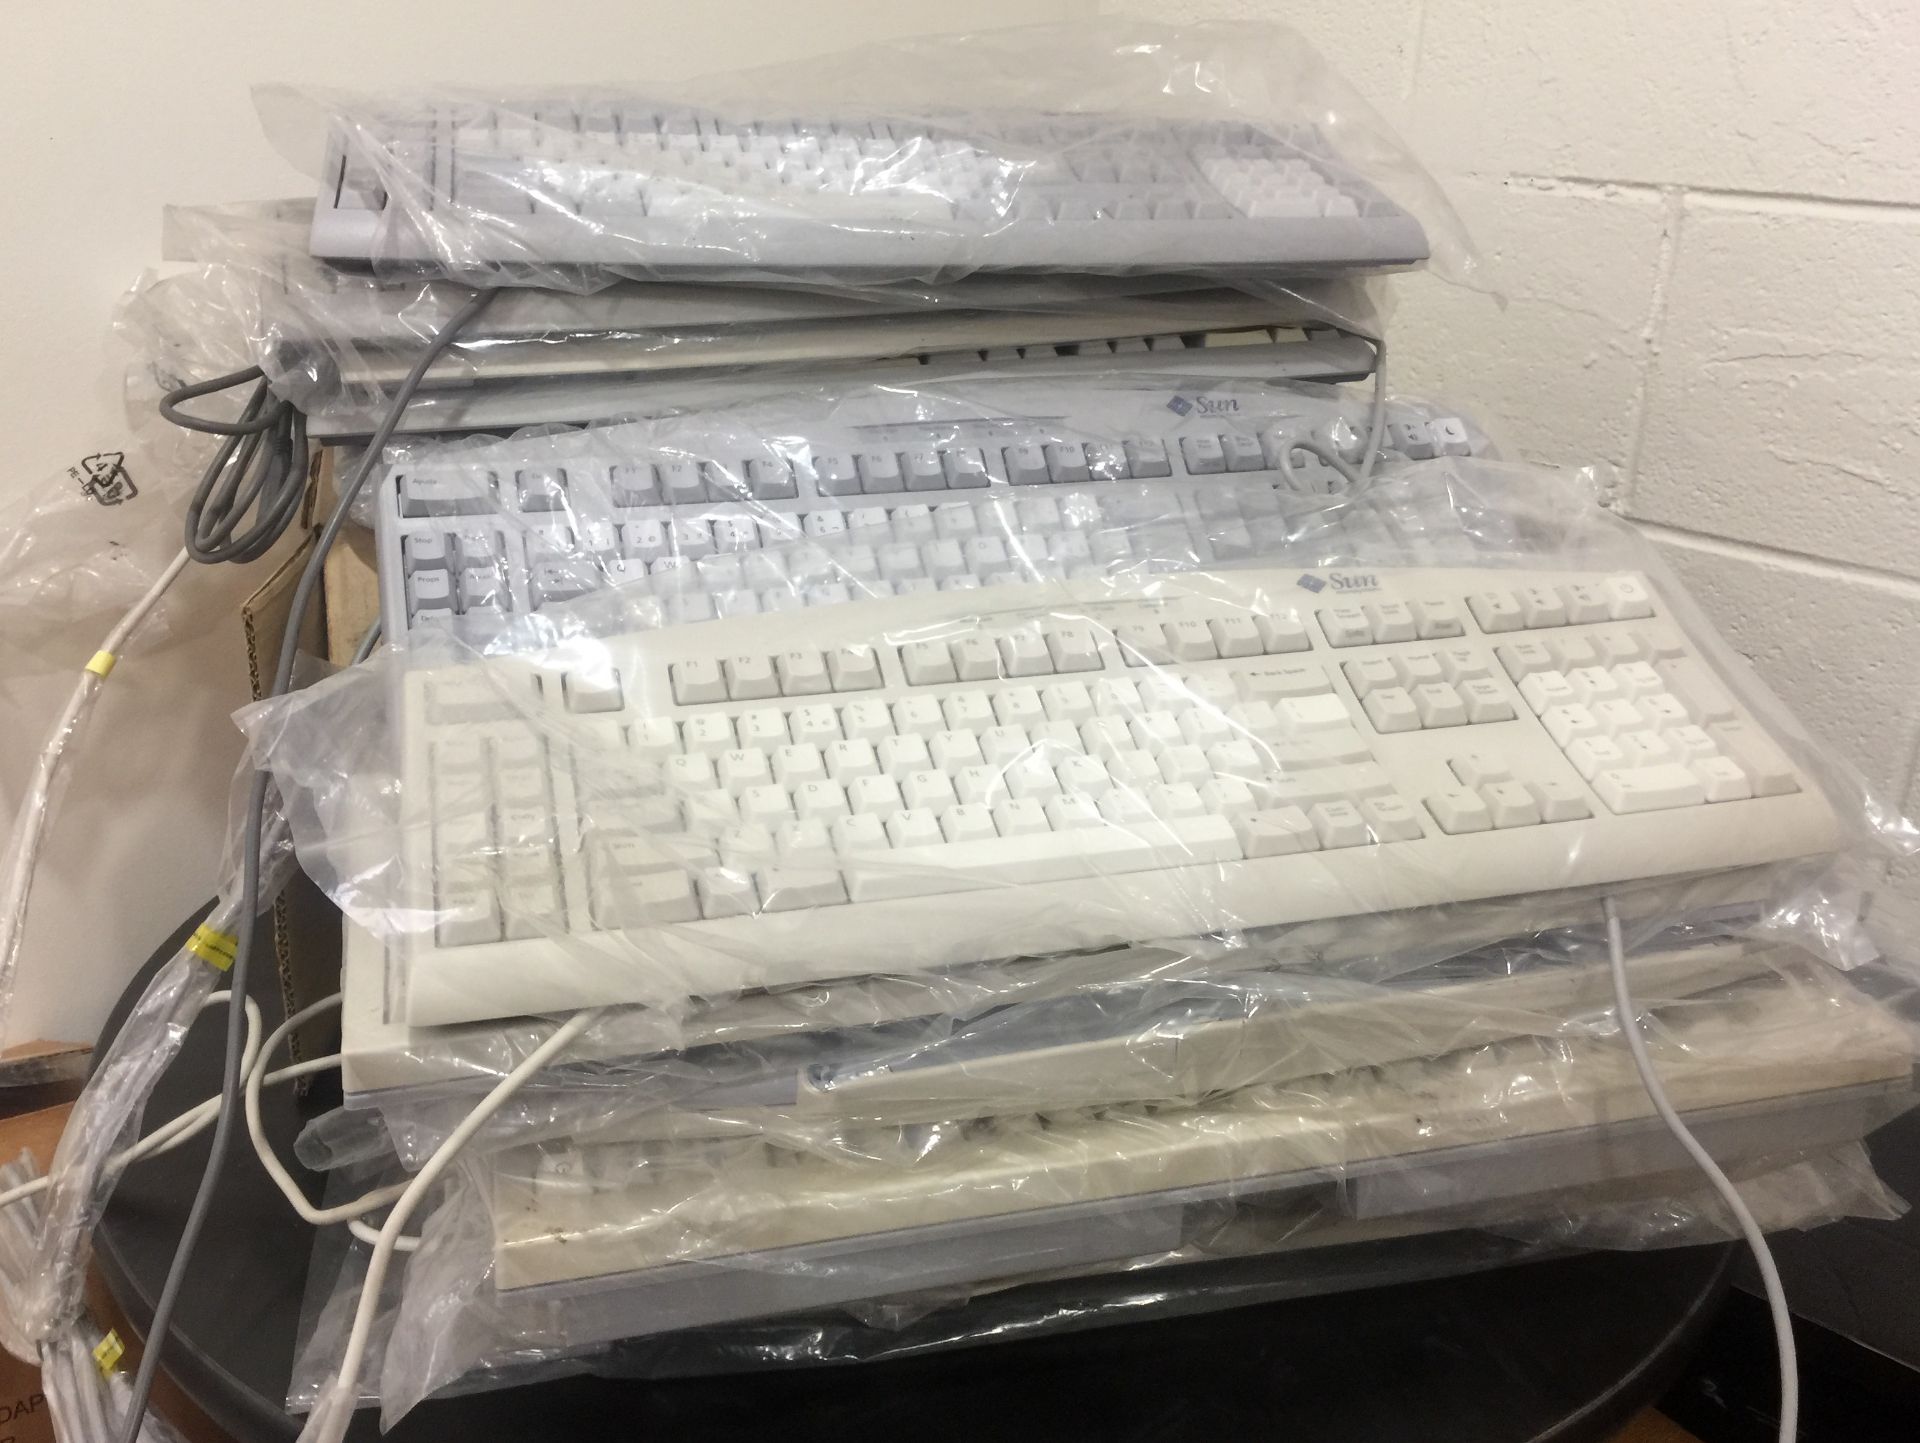 LARGE PILE BRAND NEW SUN SYSTEM COMPUTER KEYBOARDS